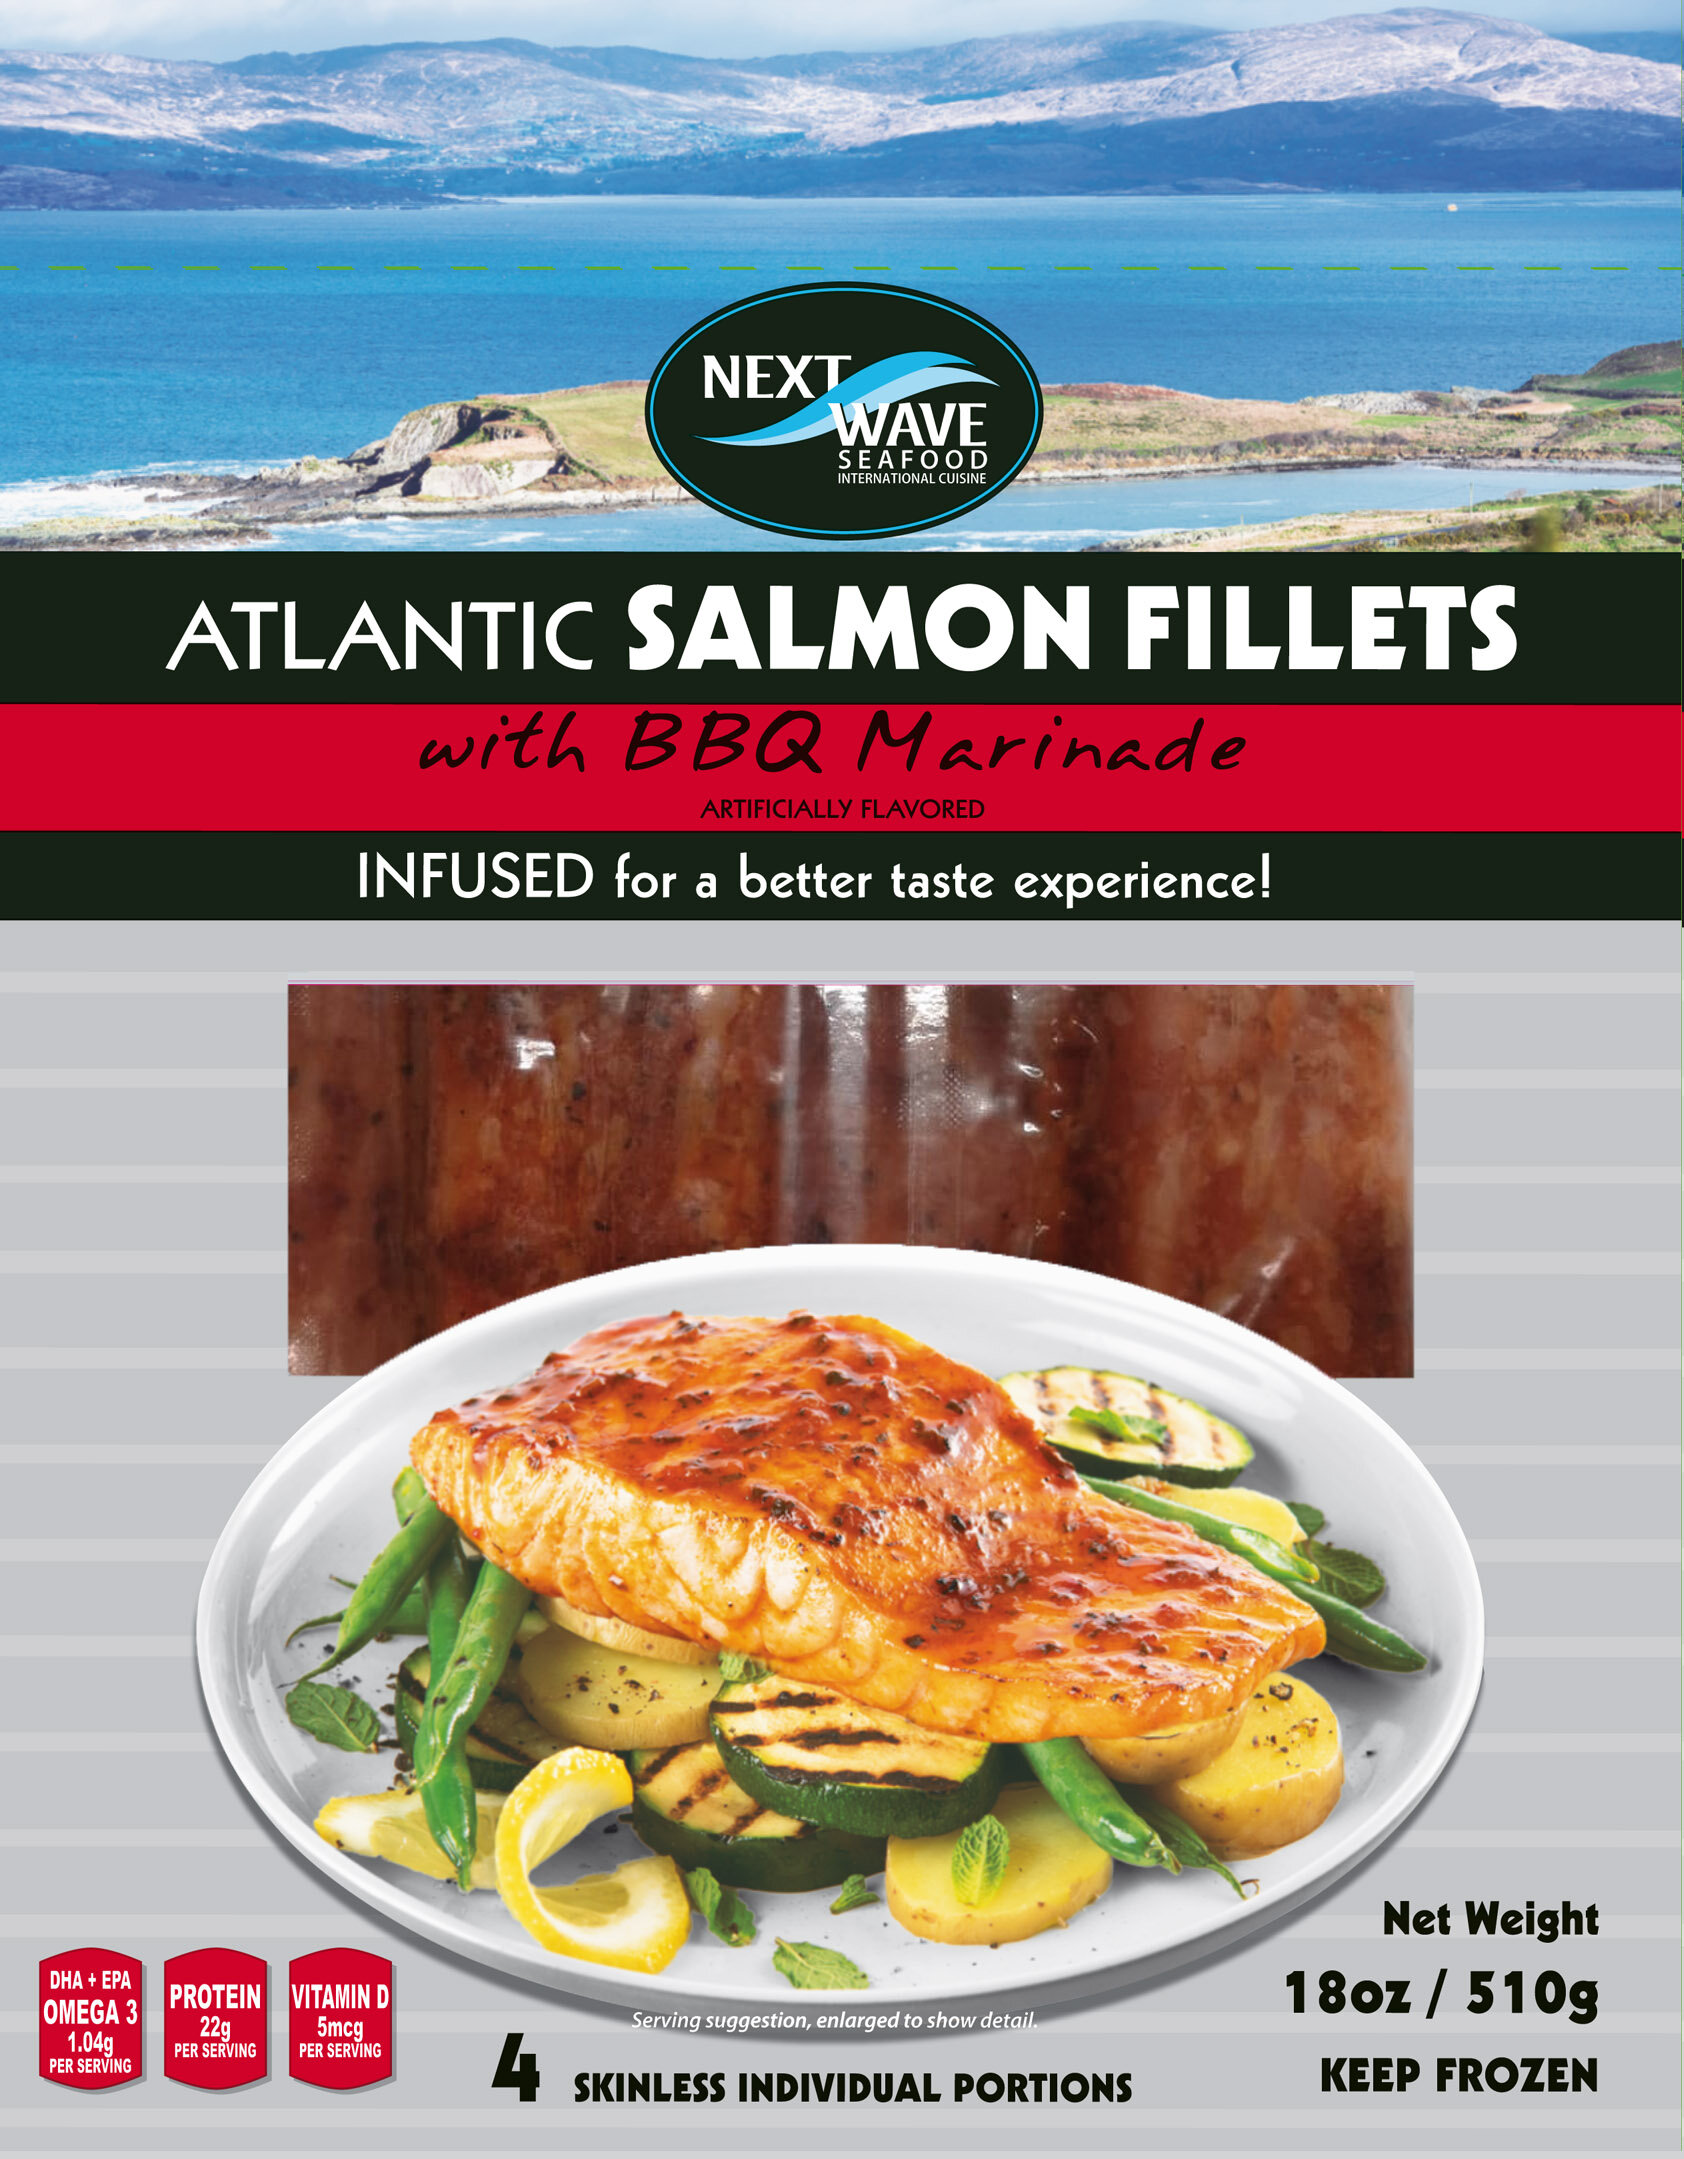 salmon fillet with BBQ marinade package